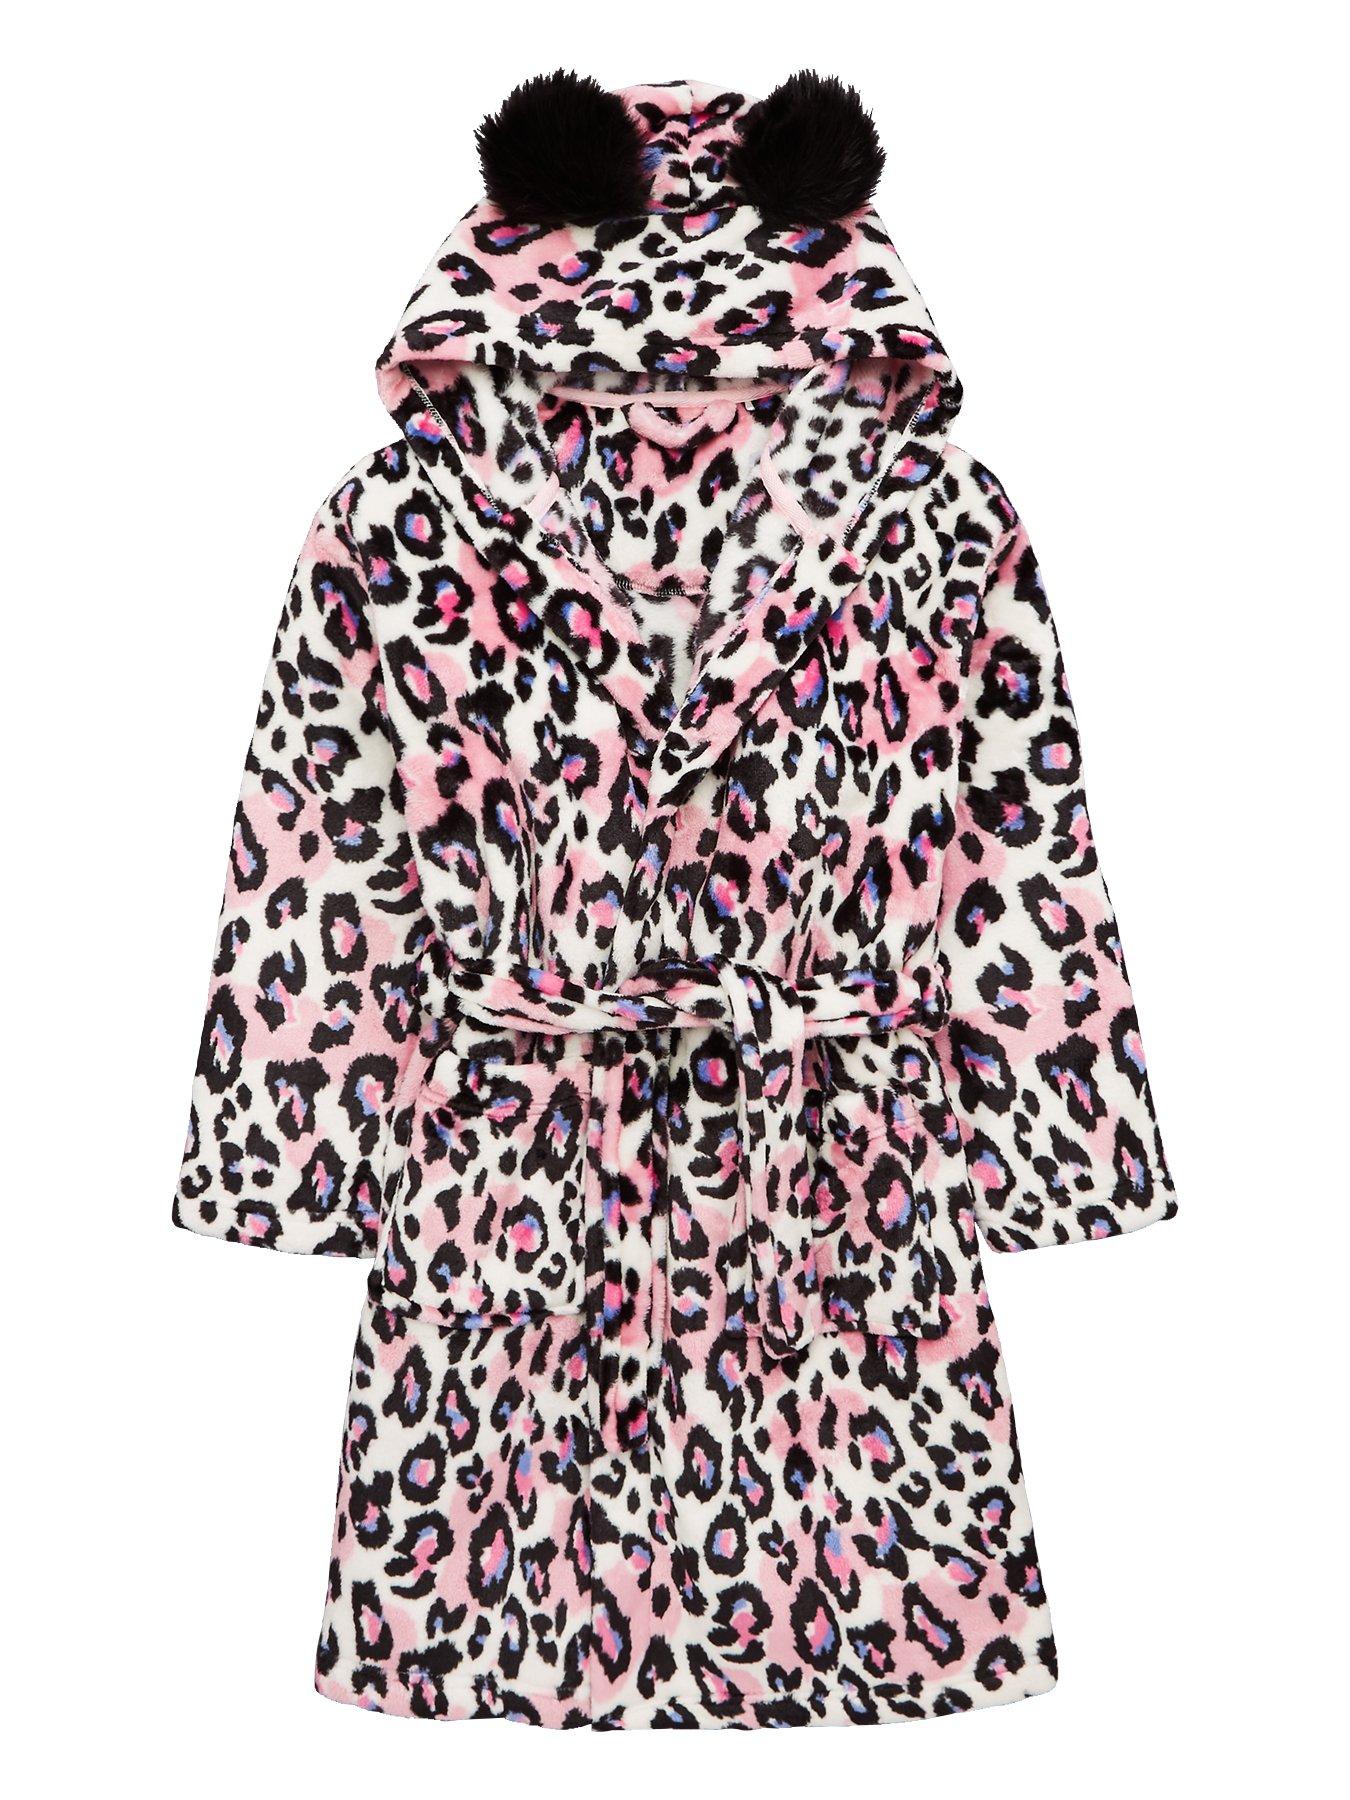 animal print dressing gown